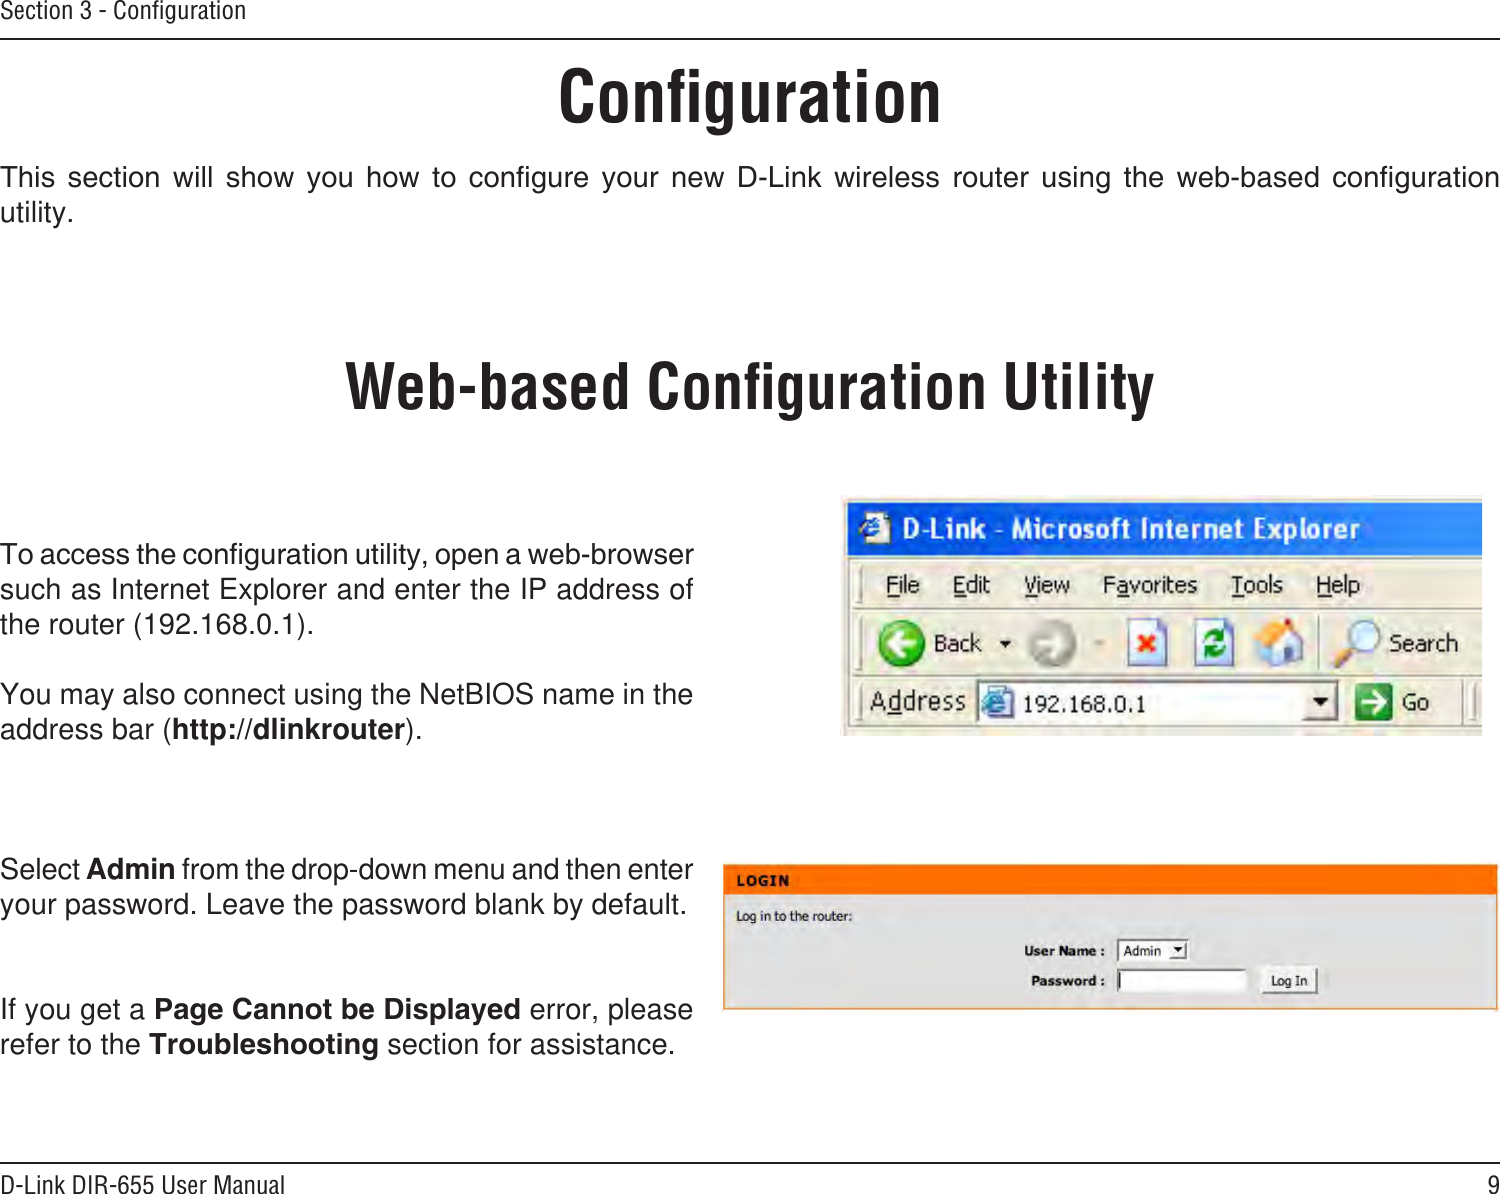 9D-Link DIR-655 User ManualSection 3 - ConﬁgurationConﬁguration                utility.Web-based Conﬁguration Utilitysuch as Internet Explorer and enter the IP address of the router (192.168.0.1).You may also connect using the NetBIOS name in the address bar (http://dlinkrouter).Select Admin from the drop-down menu and then enter your password. Leave the password blank by default.If you get a  error, please refer to the  section for assistance.